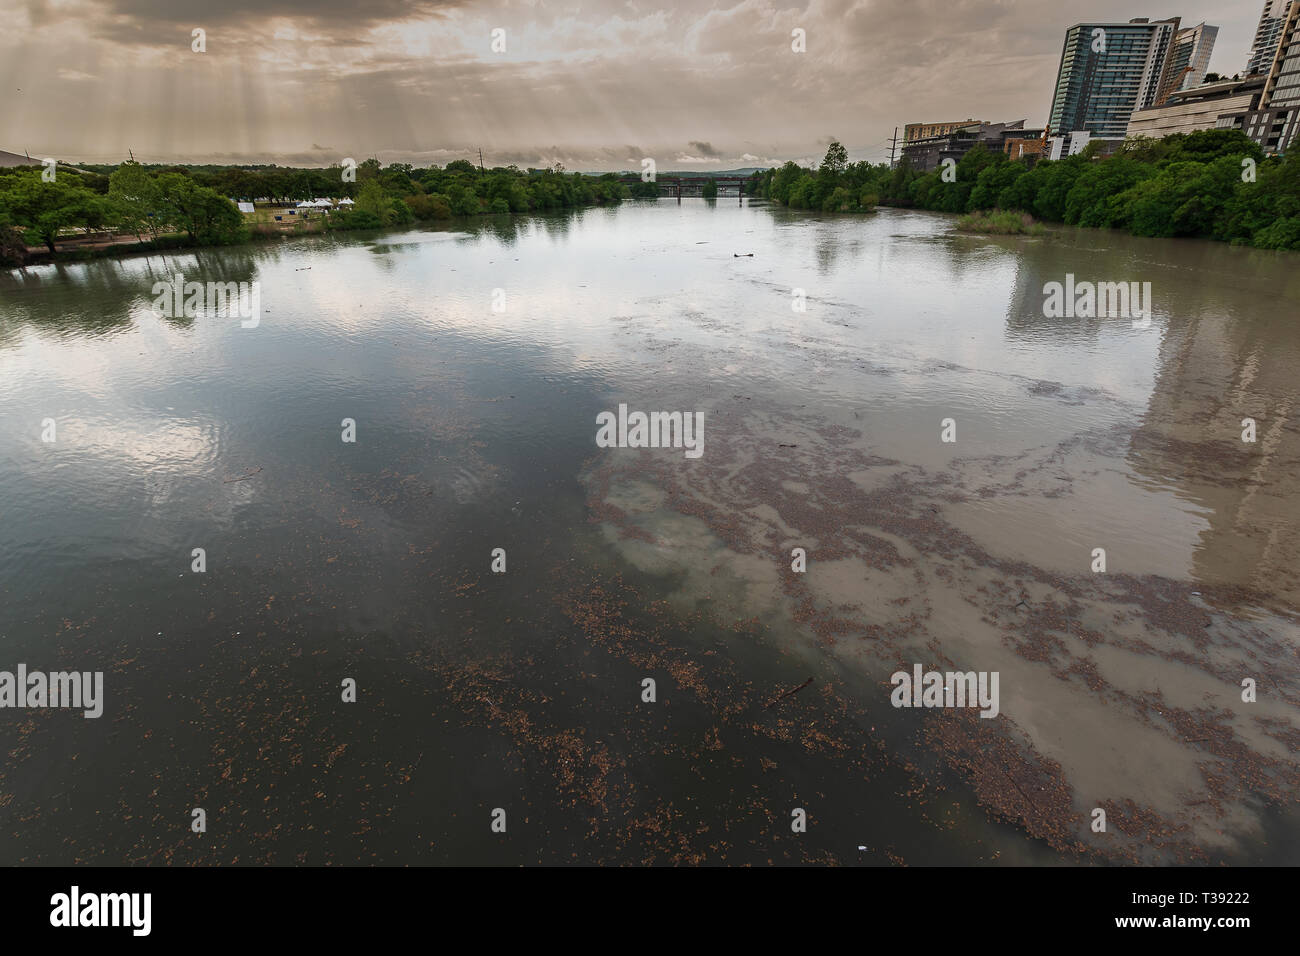 After a day of extremely heavy rains, Lady Bird Lake in downtown Austin, Texas, overflows its banks on to the surrounding walking and biking trails. Stock Photo